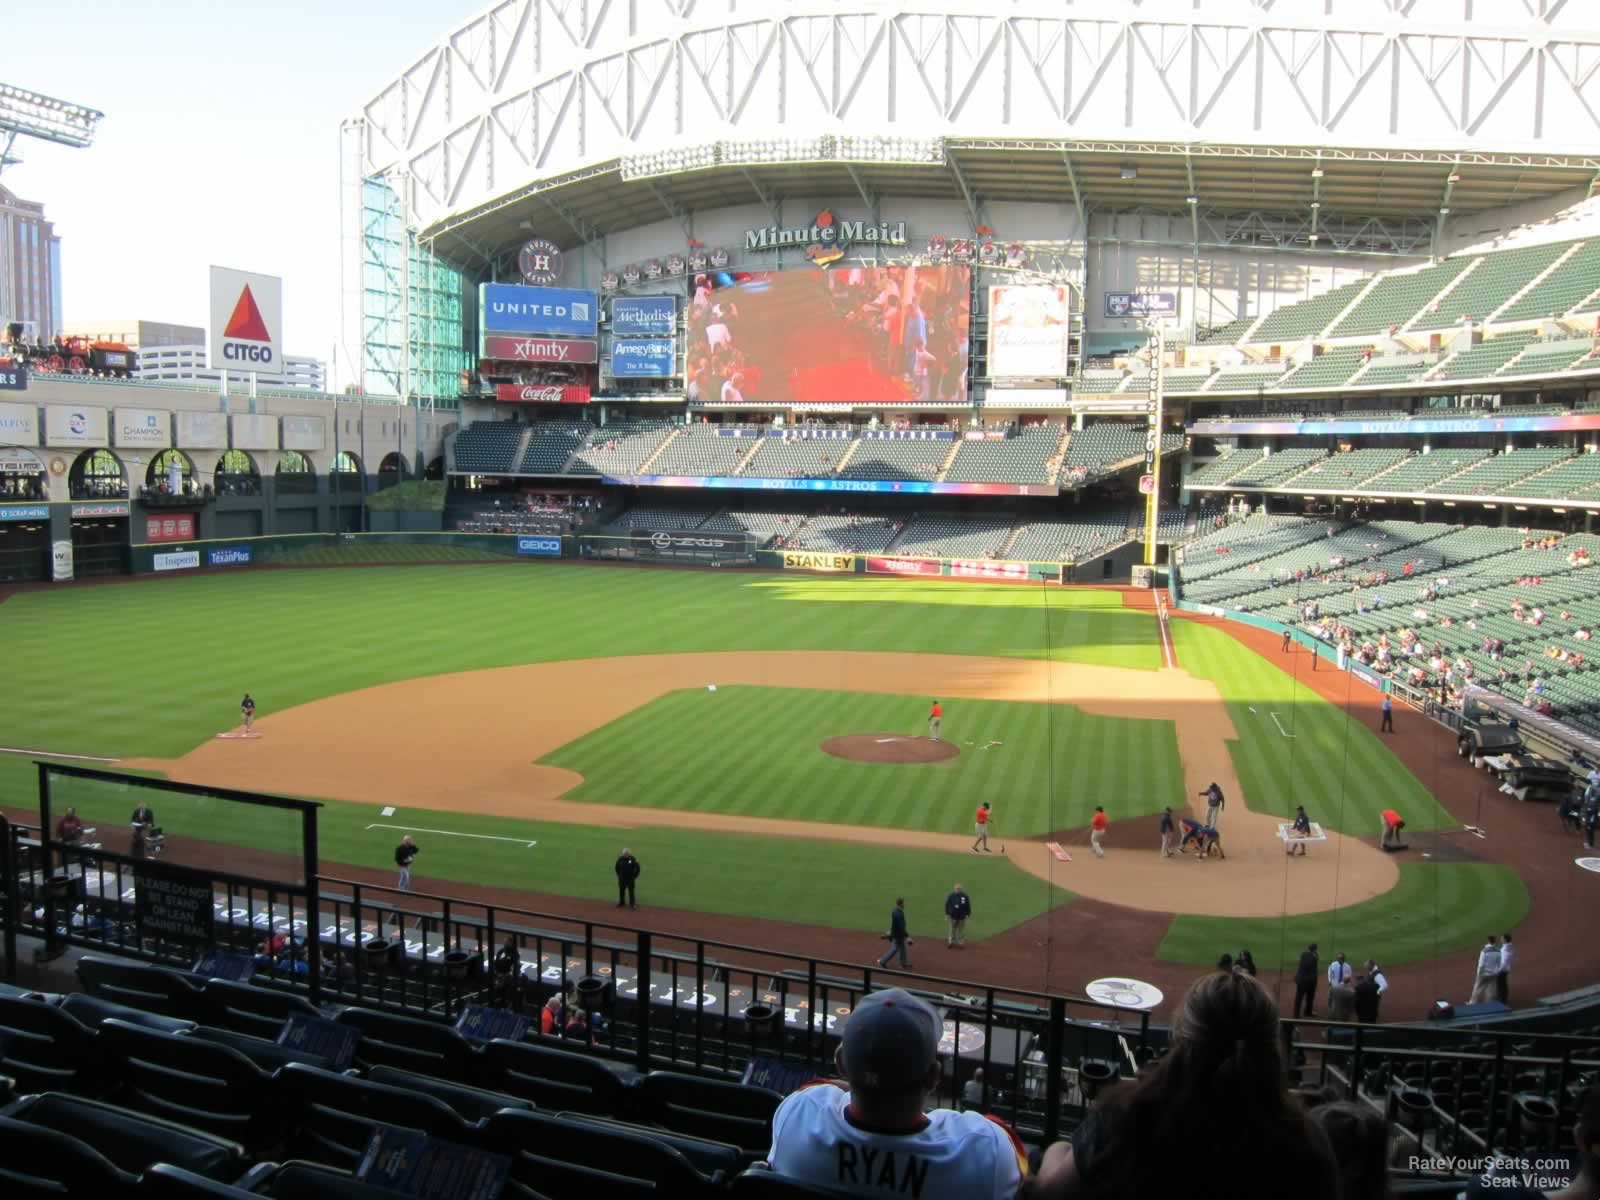 Section 215 at Minute Maid Park 